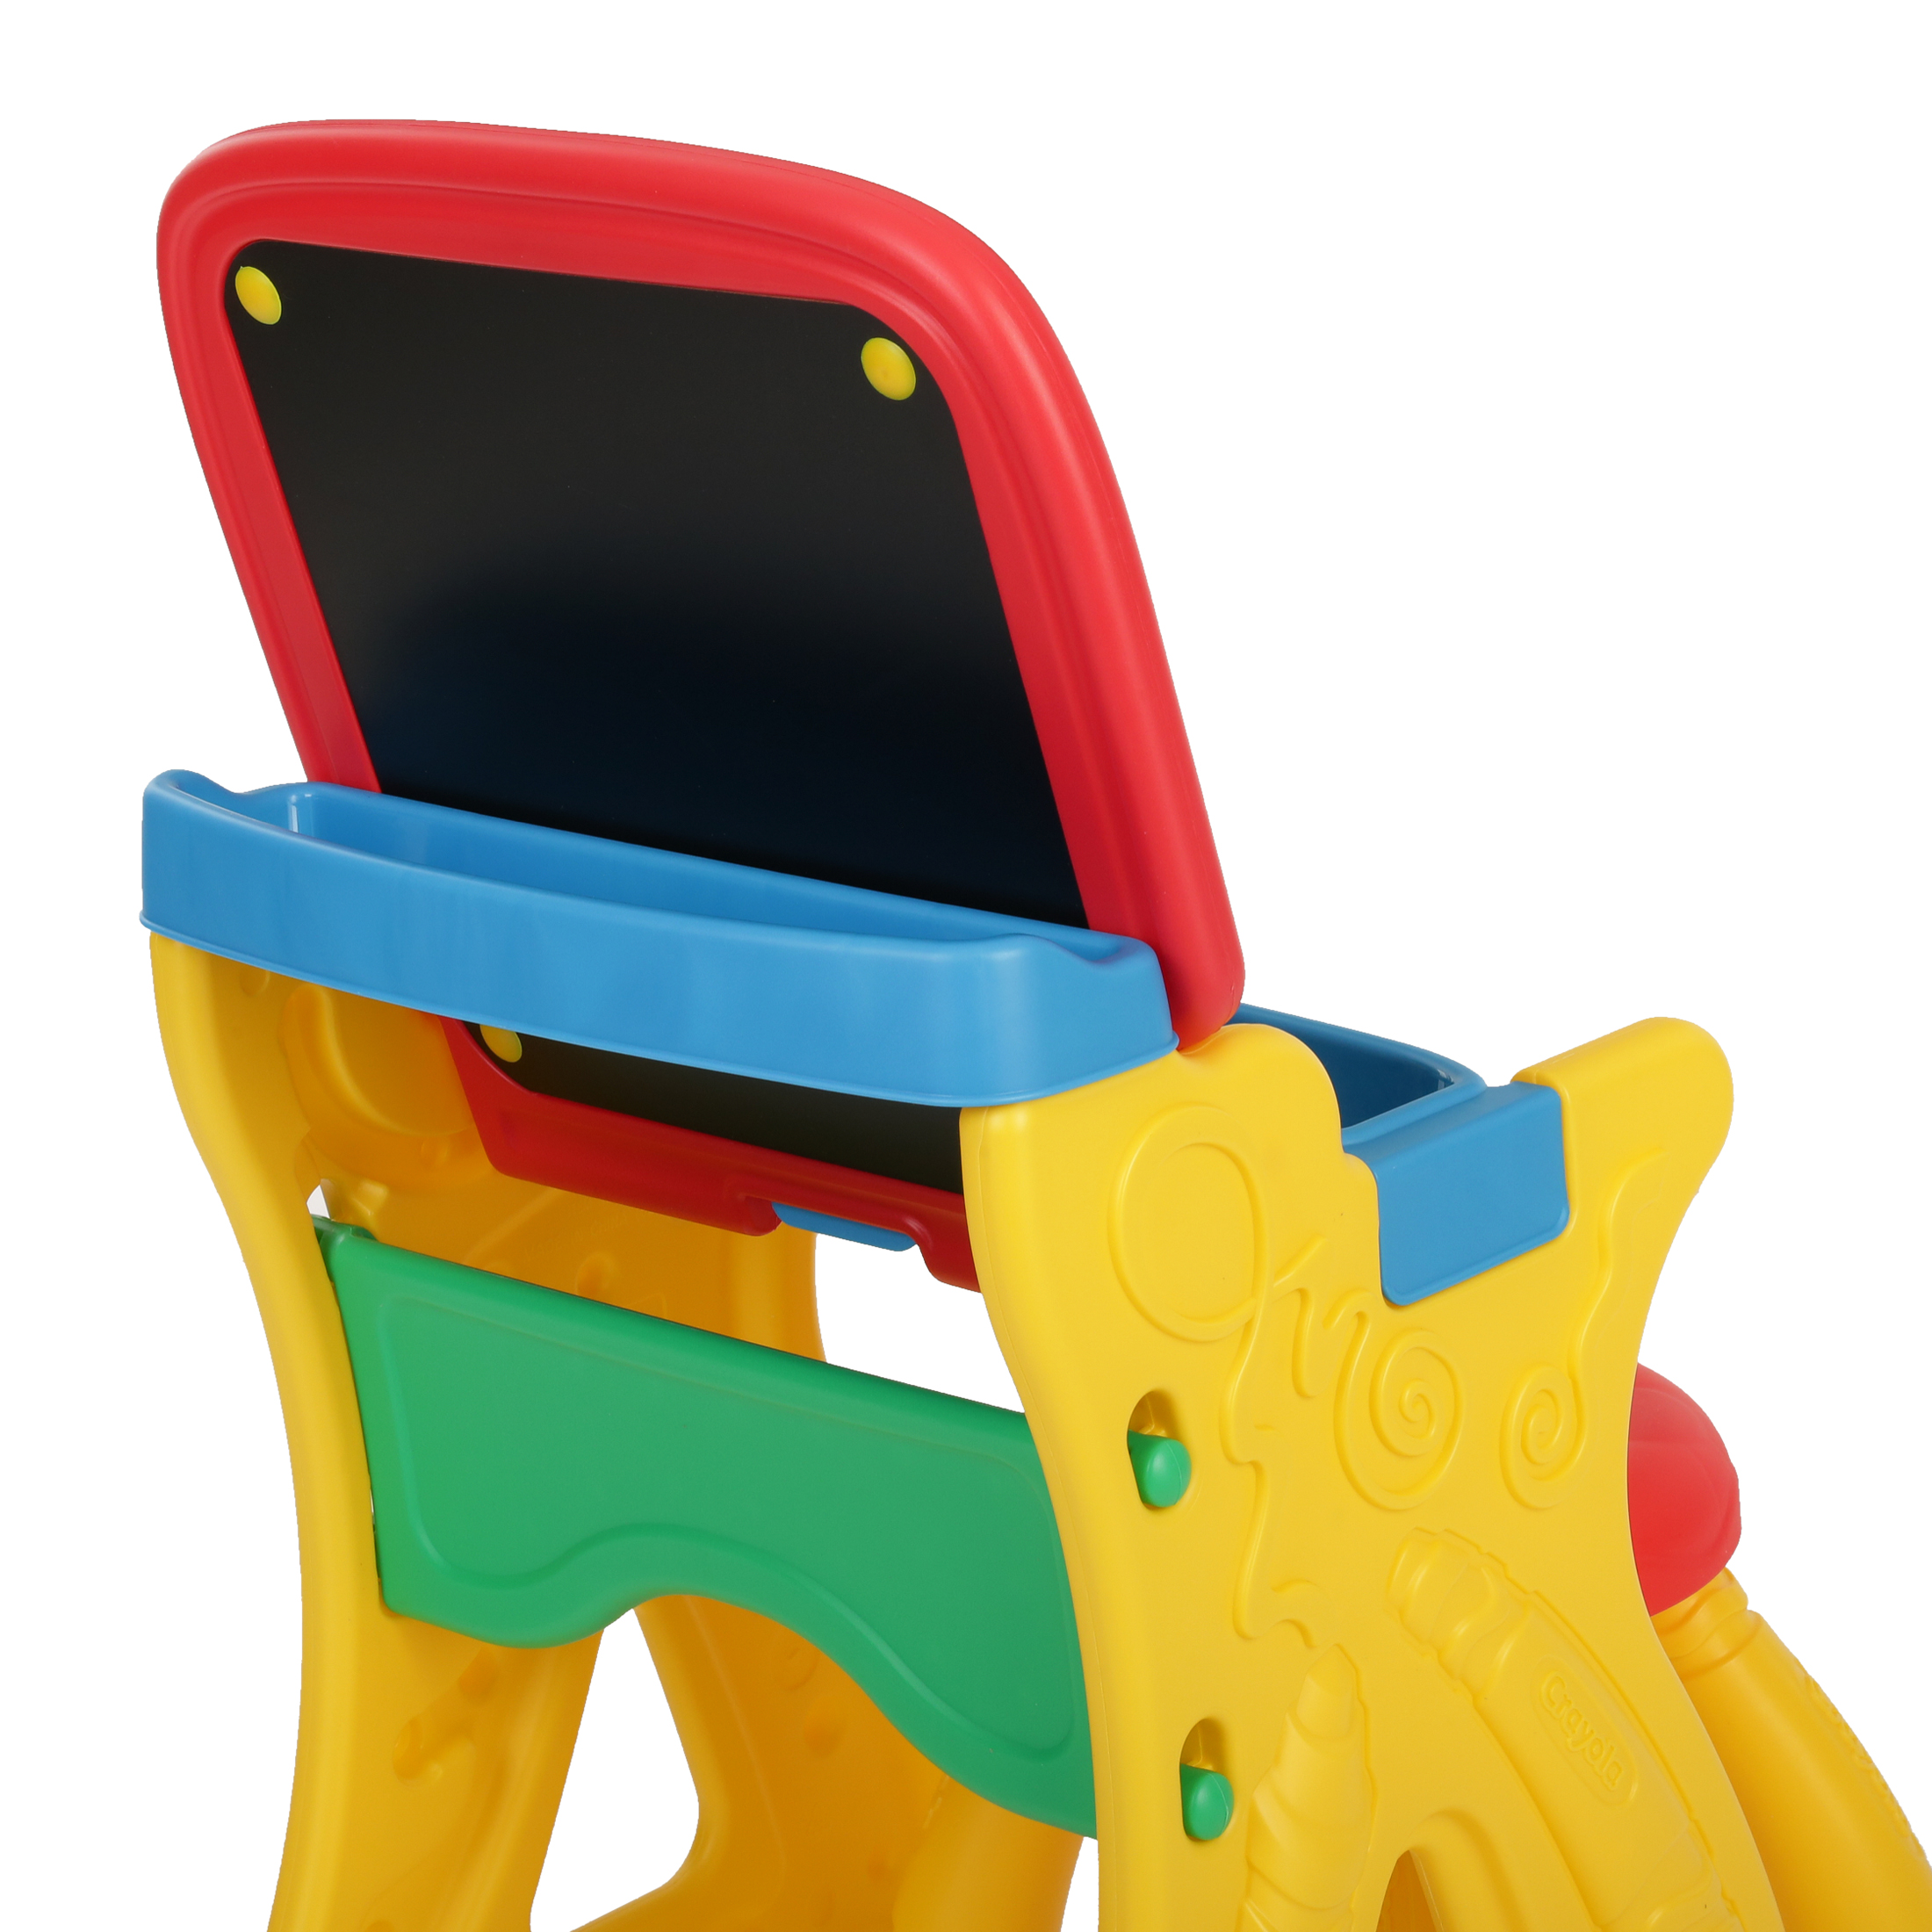 Crayola Play 'N Fold 2-in-1 Art Studio Easel Desk – Ages 3 Years and up - Multi in color - image 4 of 12